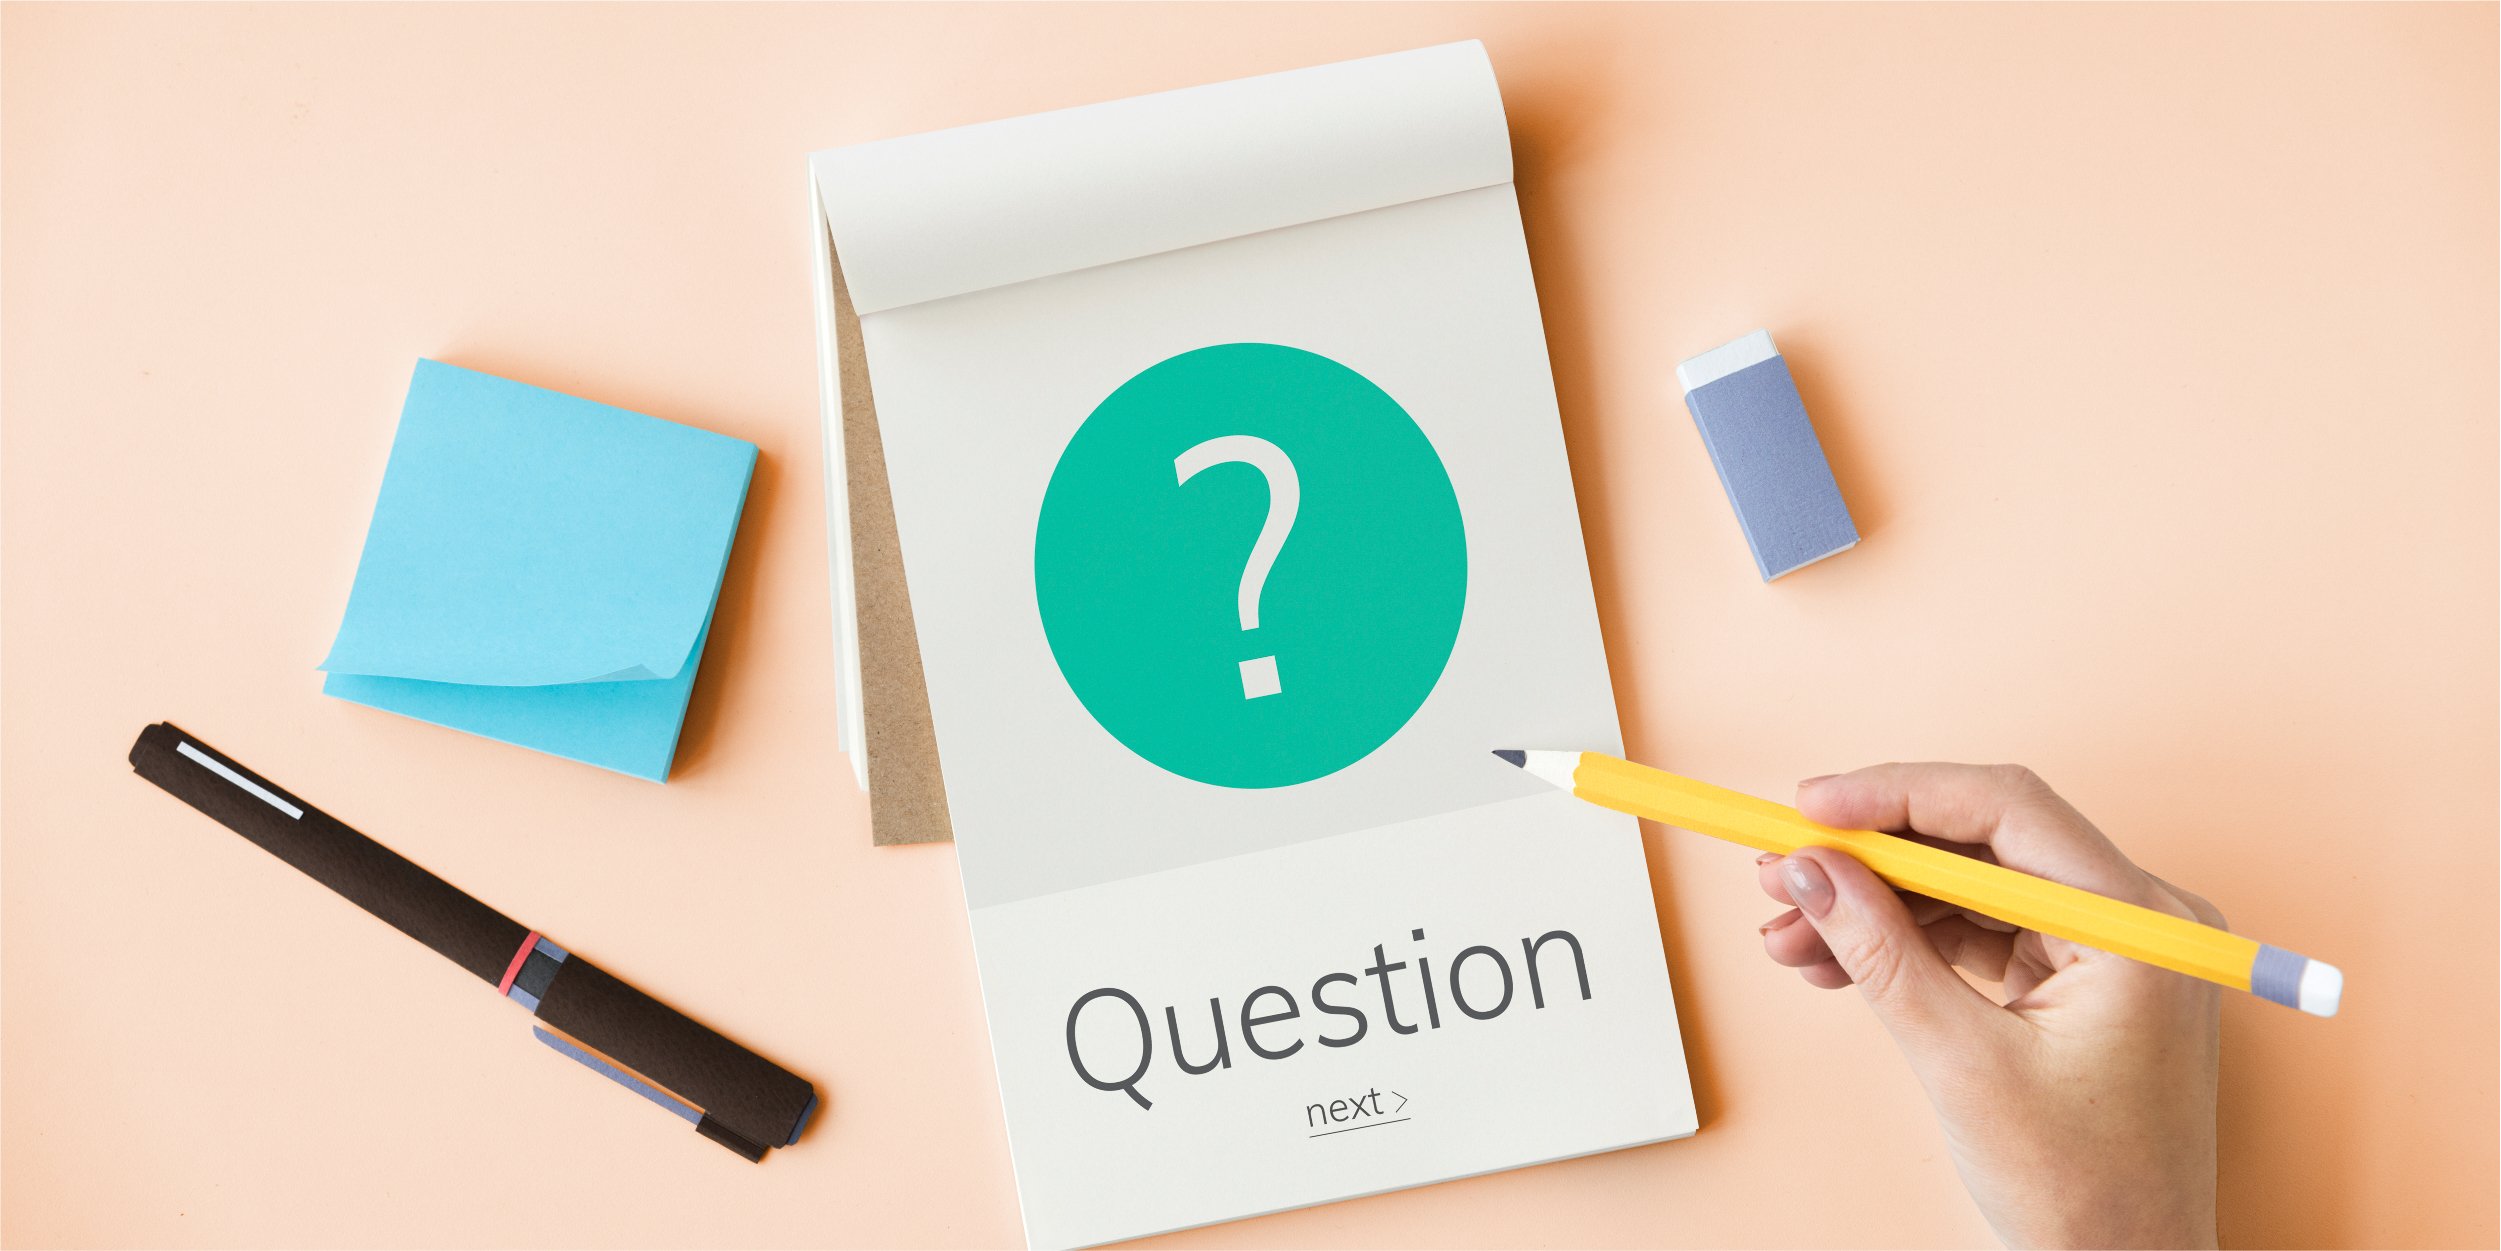 Better Advisory Services Means Asking Better Questions: 5 Questions You Should Be Asking | Botkeeper